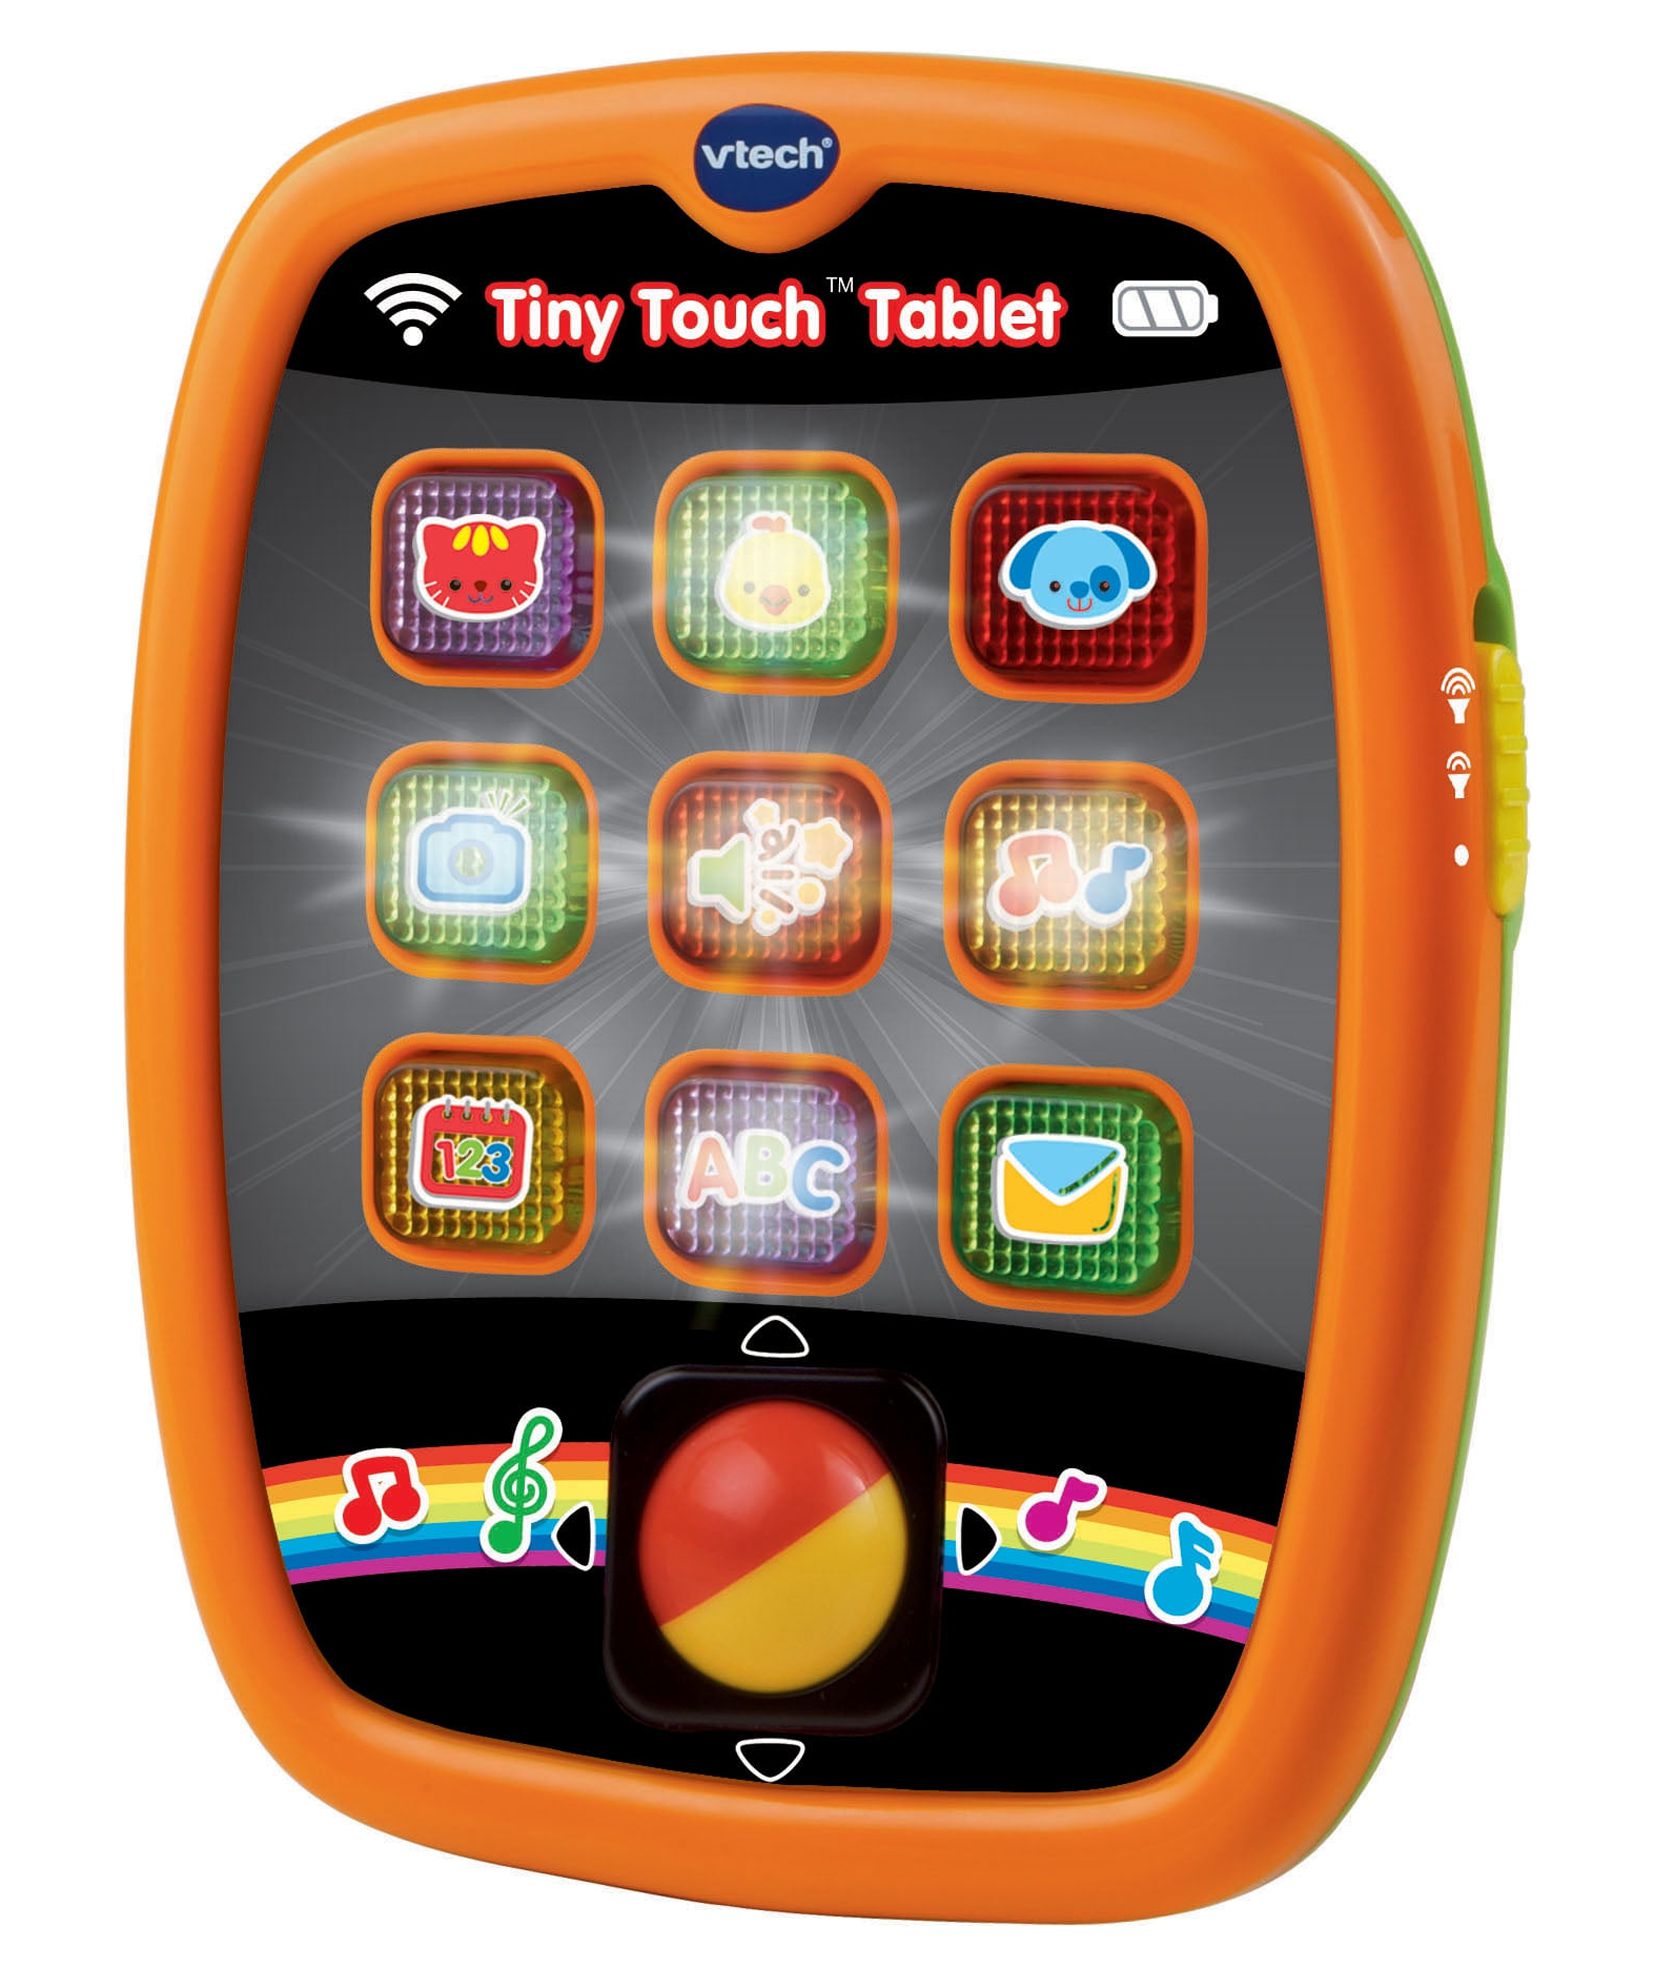 VTech Tiny Touch Tablet, Learning Toy for Baby, Teaches Letters, Numbers, Walmart Exclusive - image 3 of 5